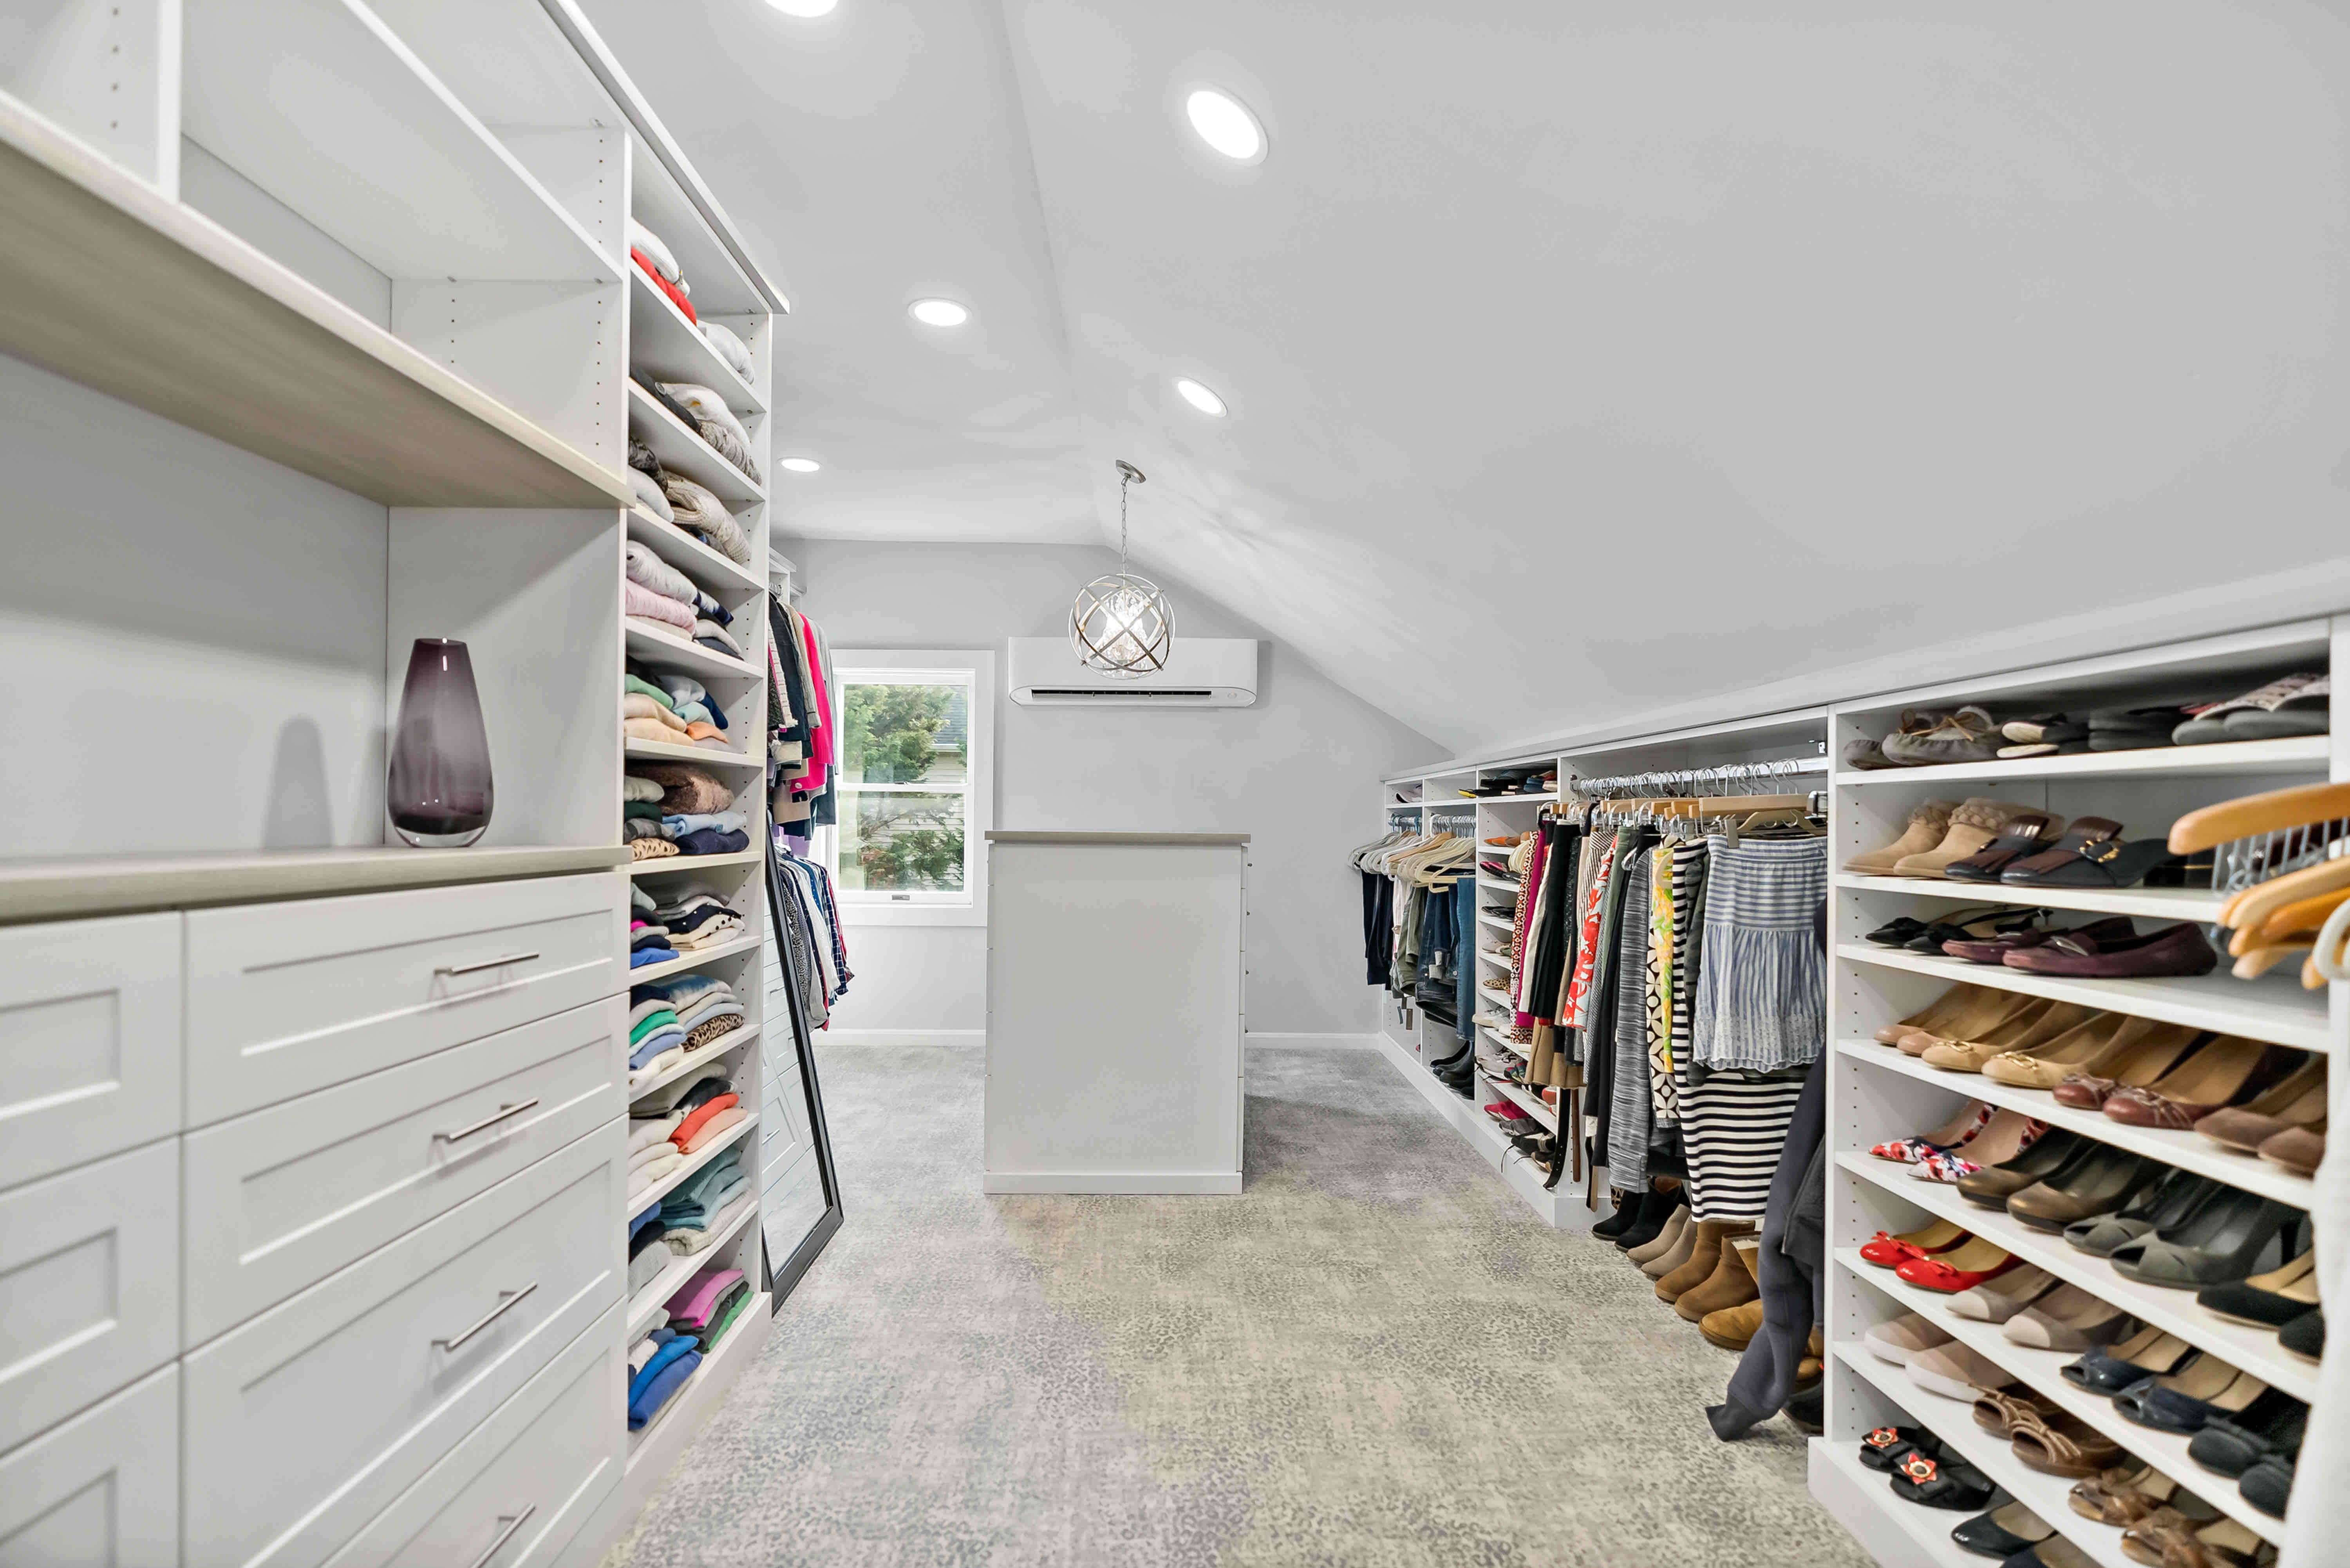 Large bedroom closet with multiple shelves for clothes